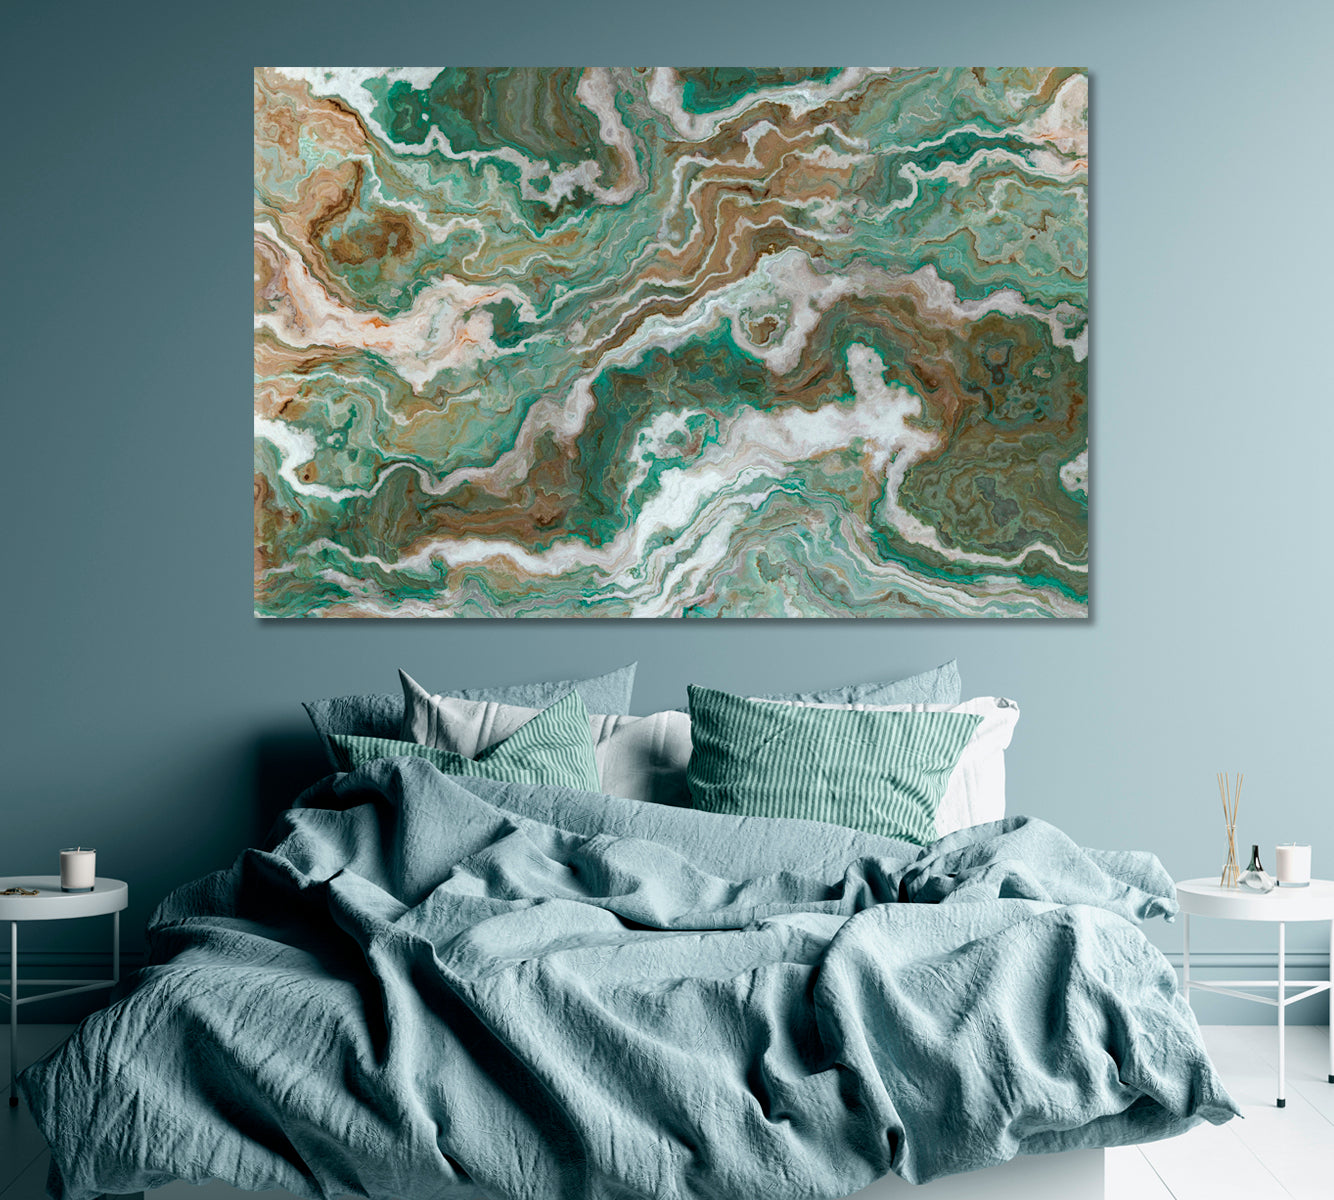 Green Marble Canvas Print ArtLexy 1 Panel 24"x16" inches 